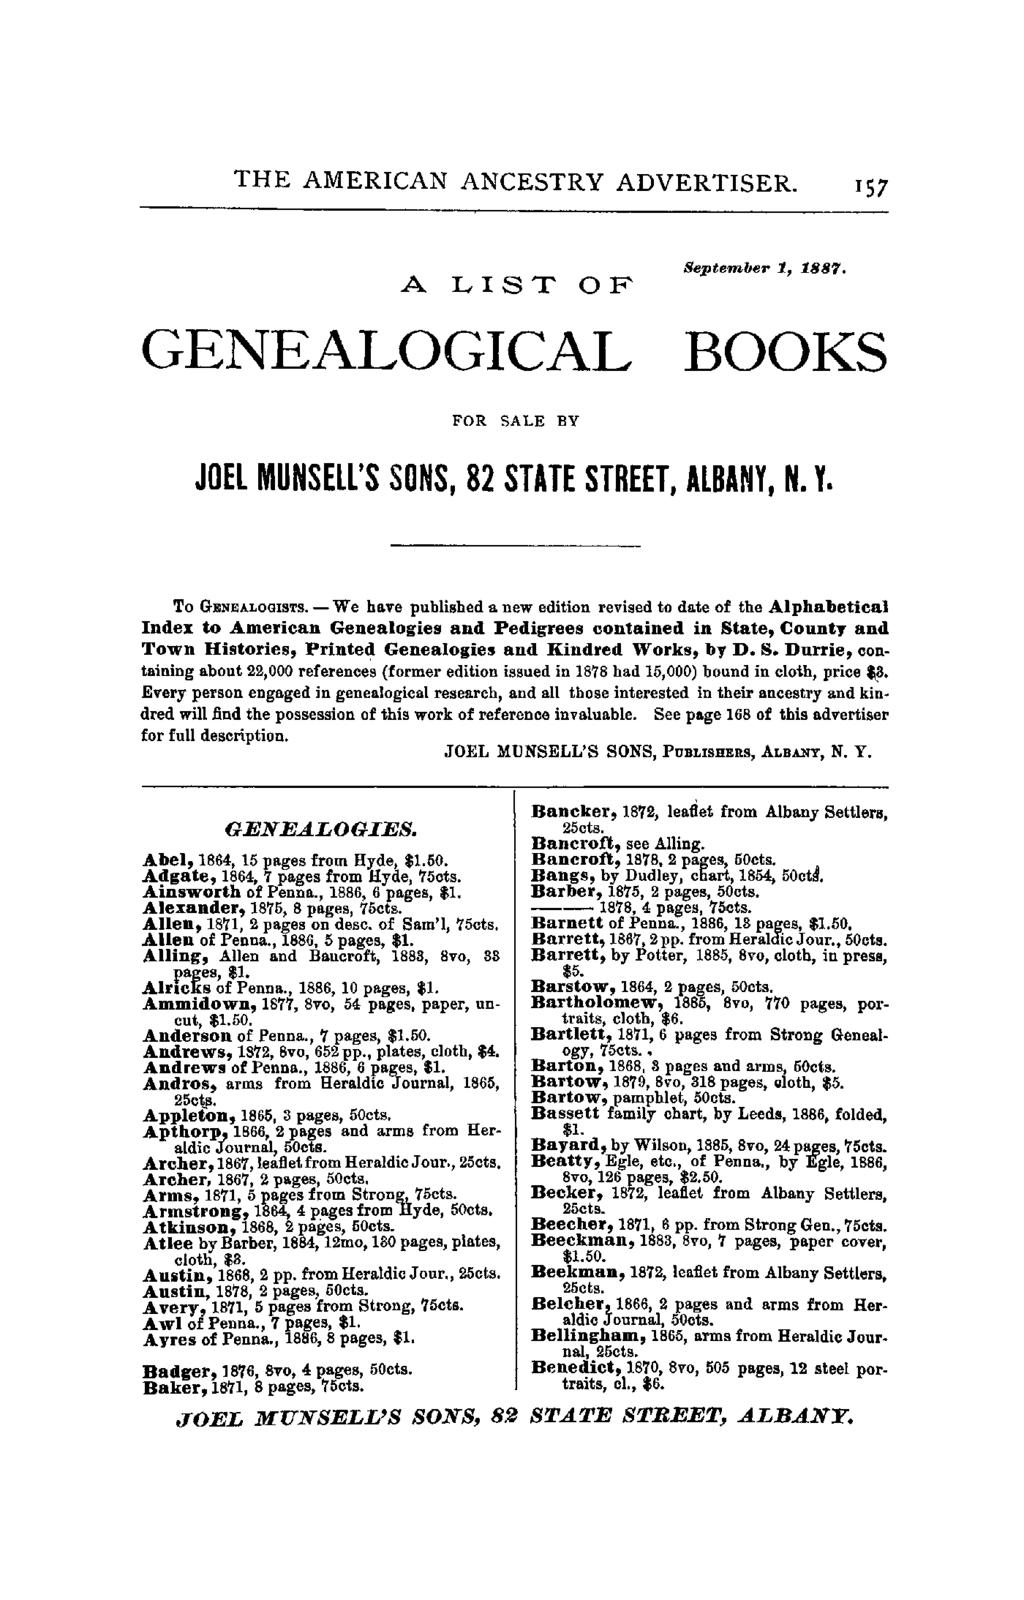 THE AMERICAN ANCESTRY ADVERTISER. 157 A LIST OF September 1, 188'1. GENEALOGICAL BOOKS FOR SALE BY JOEL MUNSELL'S SONS, 82 STATE STREET, ALBANY, N. Y. To GENEALOGISTS.